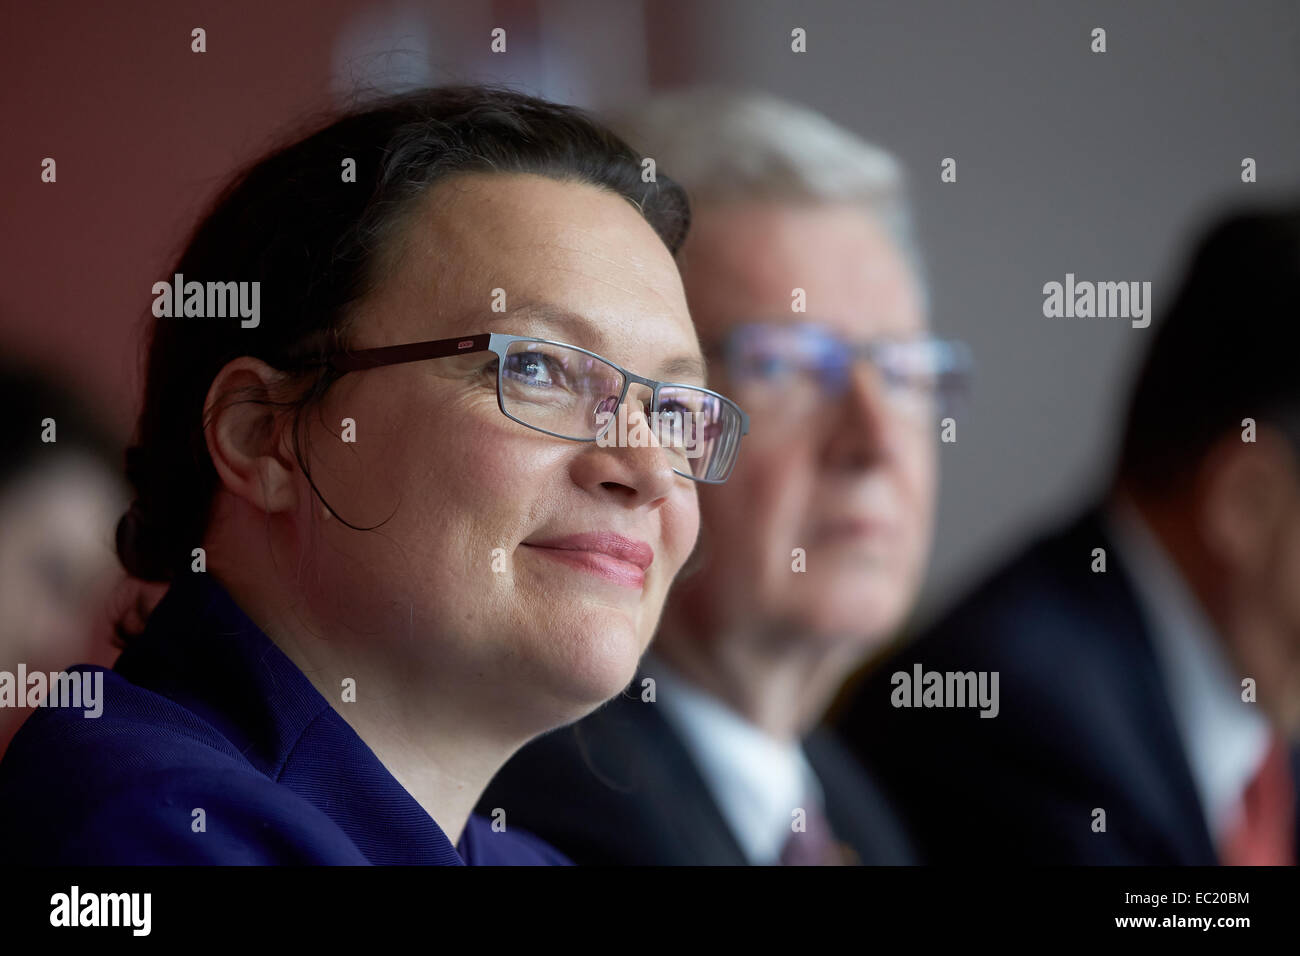 Federal Labour Minister Andrea Nahles, 31.10.2014, Koblenz Chamber of Crafts, Koblenz, Rhineland-Palatinate, Germany Stock Photo